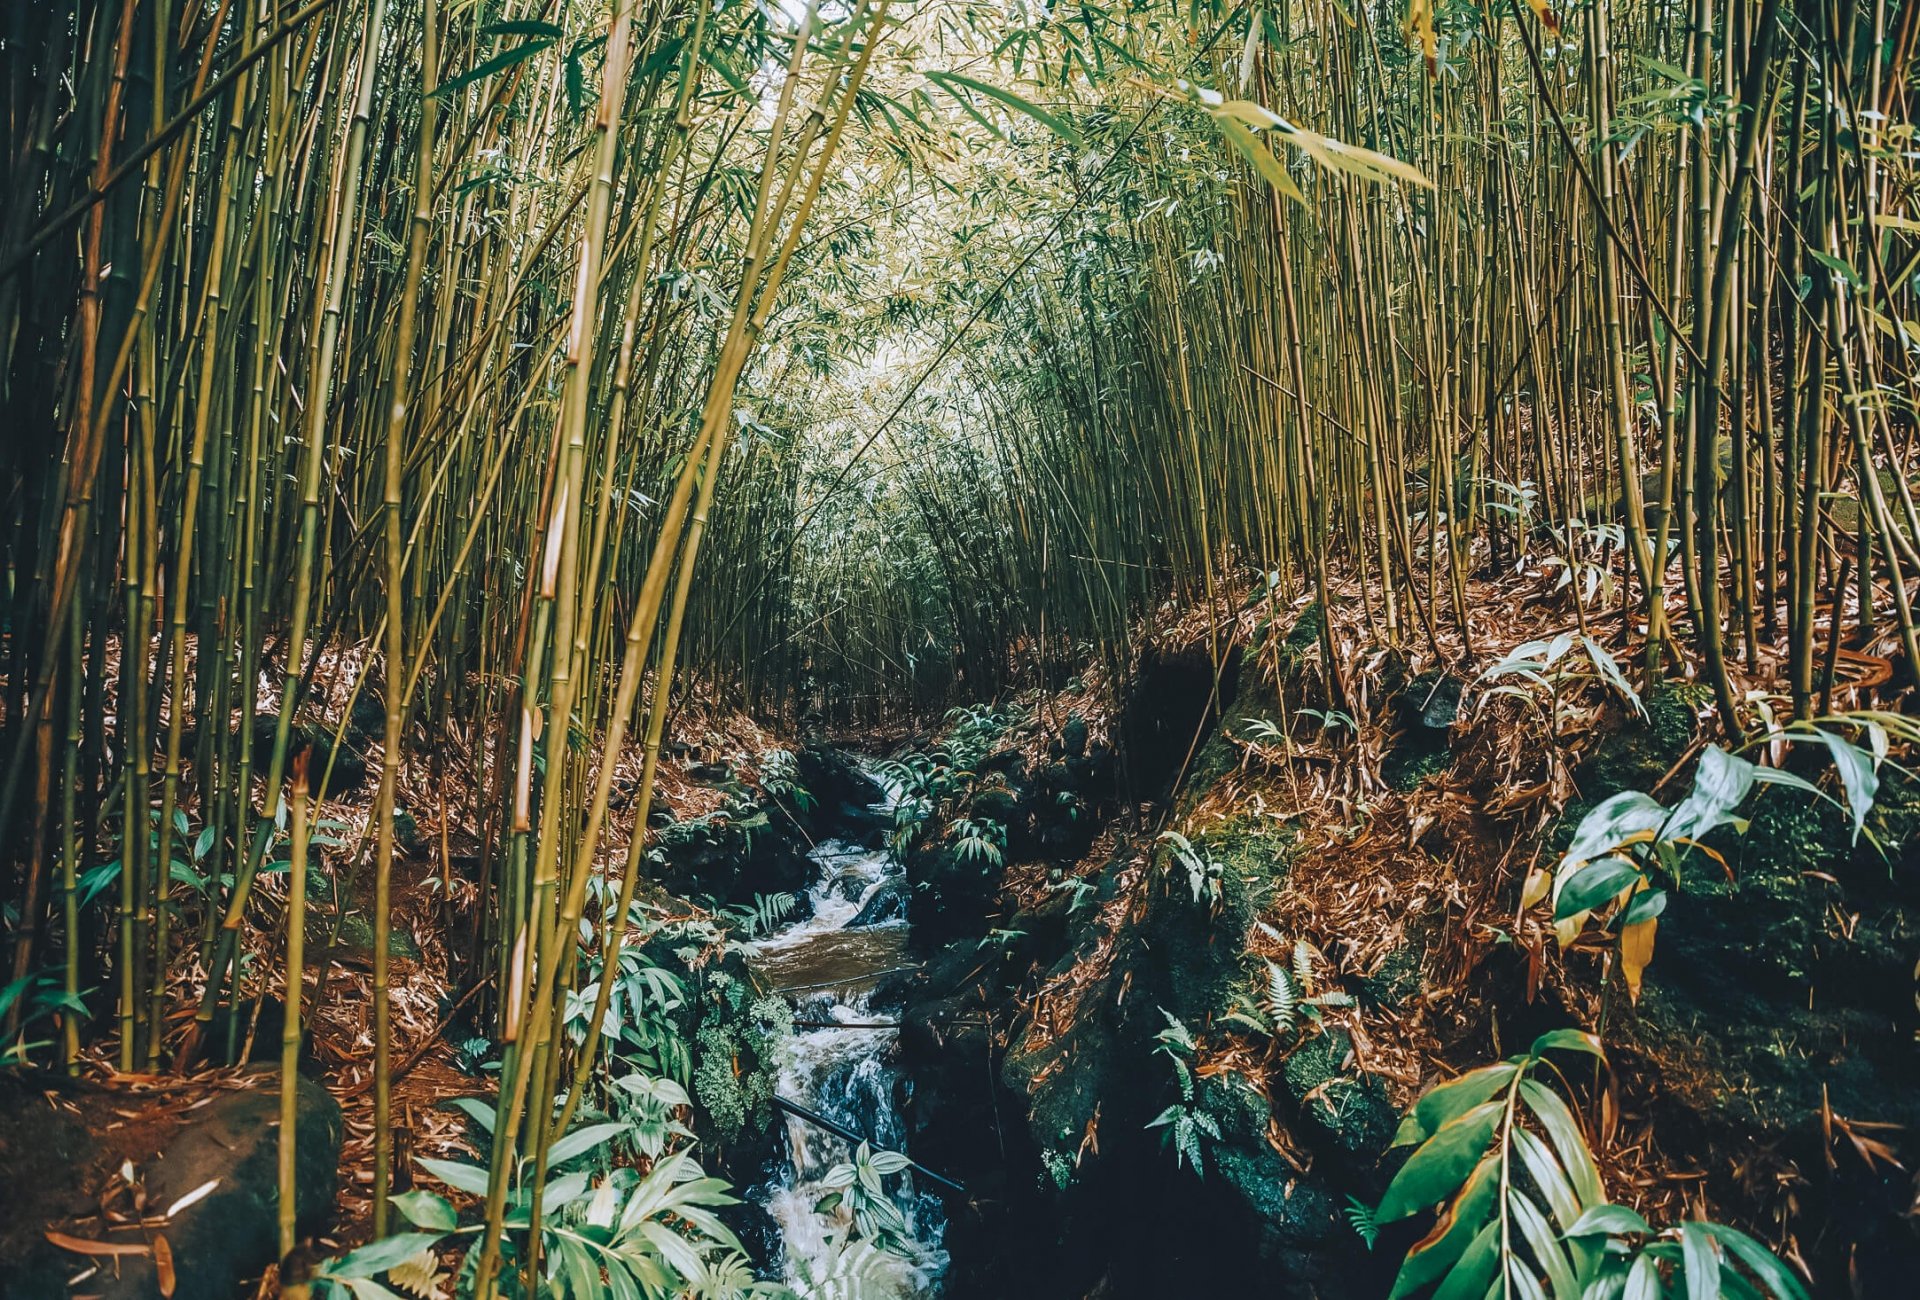 forest of bamboo with small river running through the trees